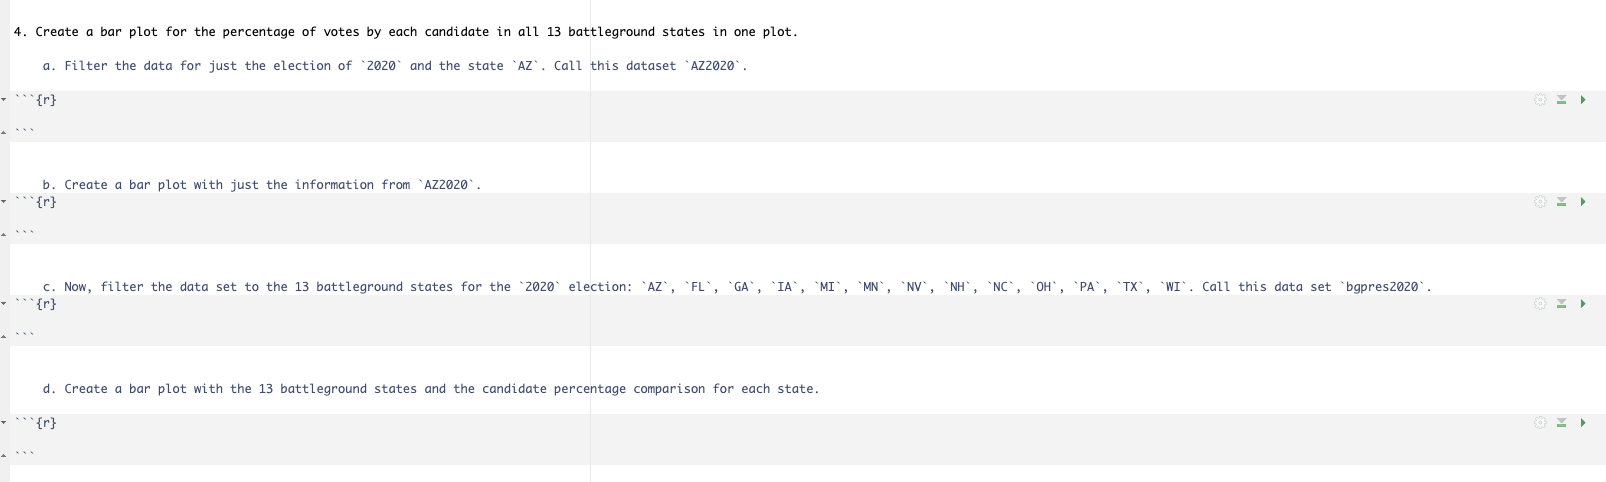 4. Create a bar plot for the percentage of votes by each candidate in all 13 battleground states in one plot.